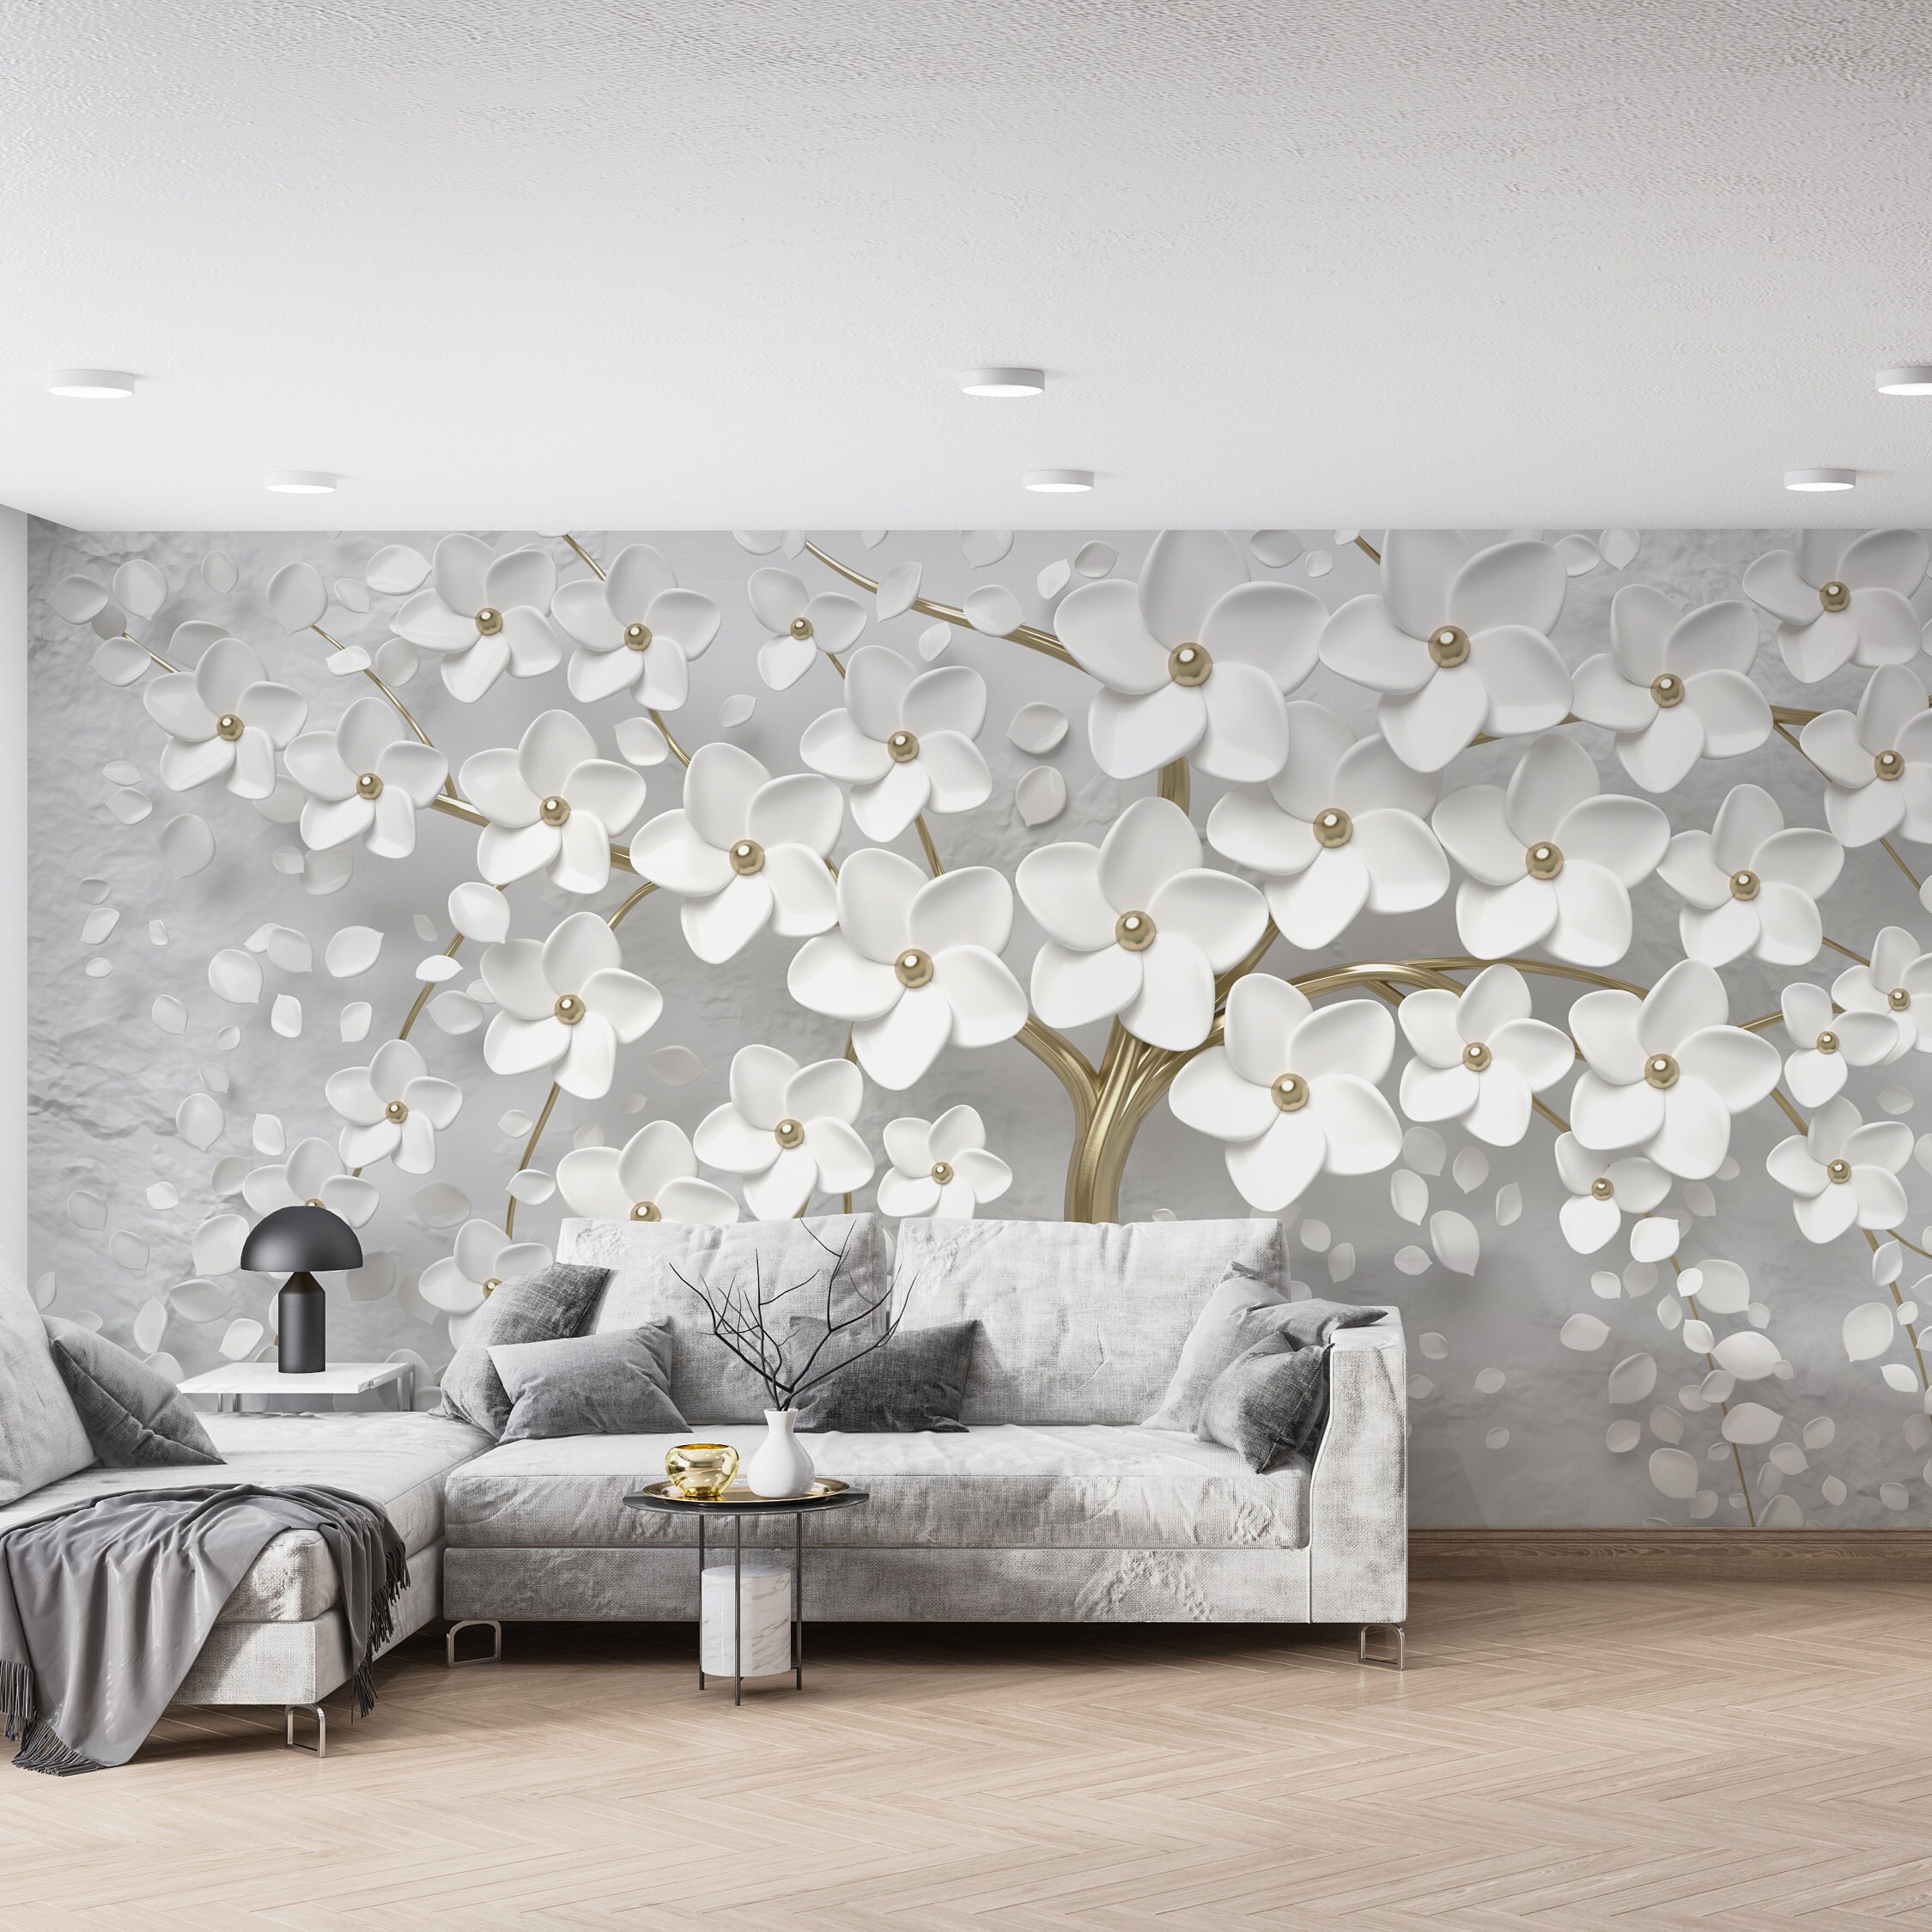 3D White Flowers 675 Wall Paper Print Decal Deco Wall Mural Self-Adhesive  Wallpaper AJ US Lv (Woven Paper (Need Glue), 【205”x114”】 520x290cm(WxH))